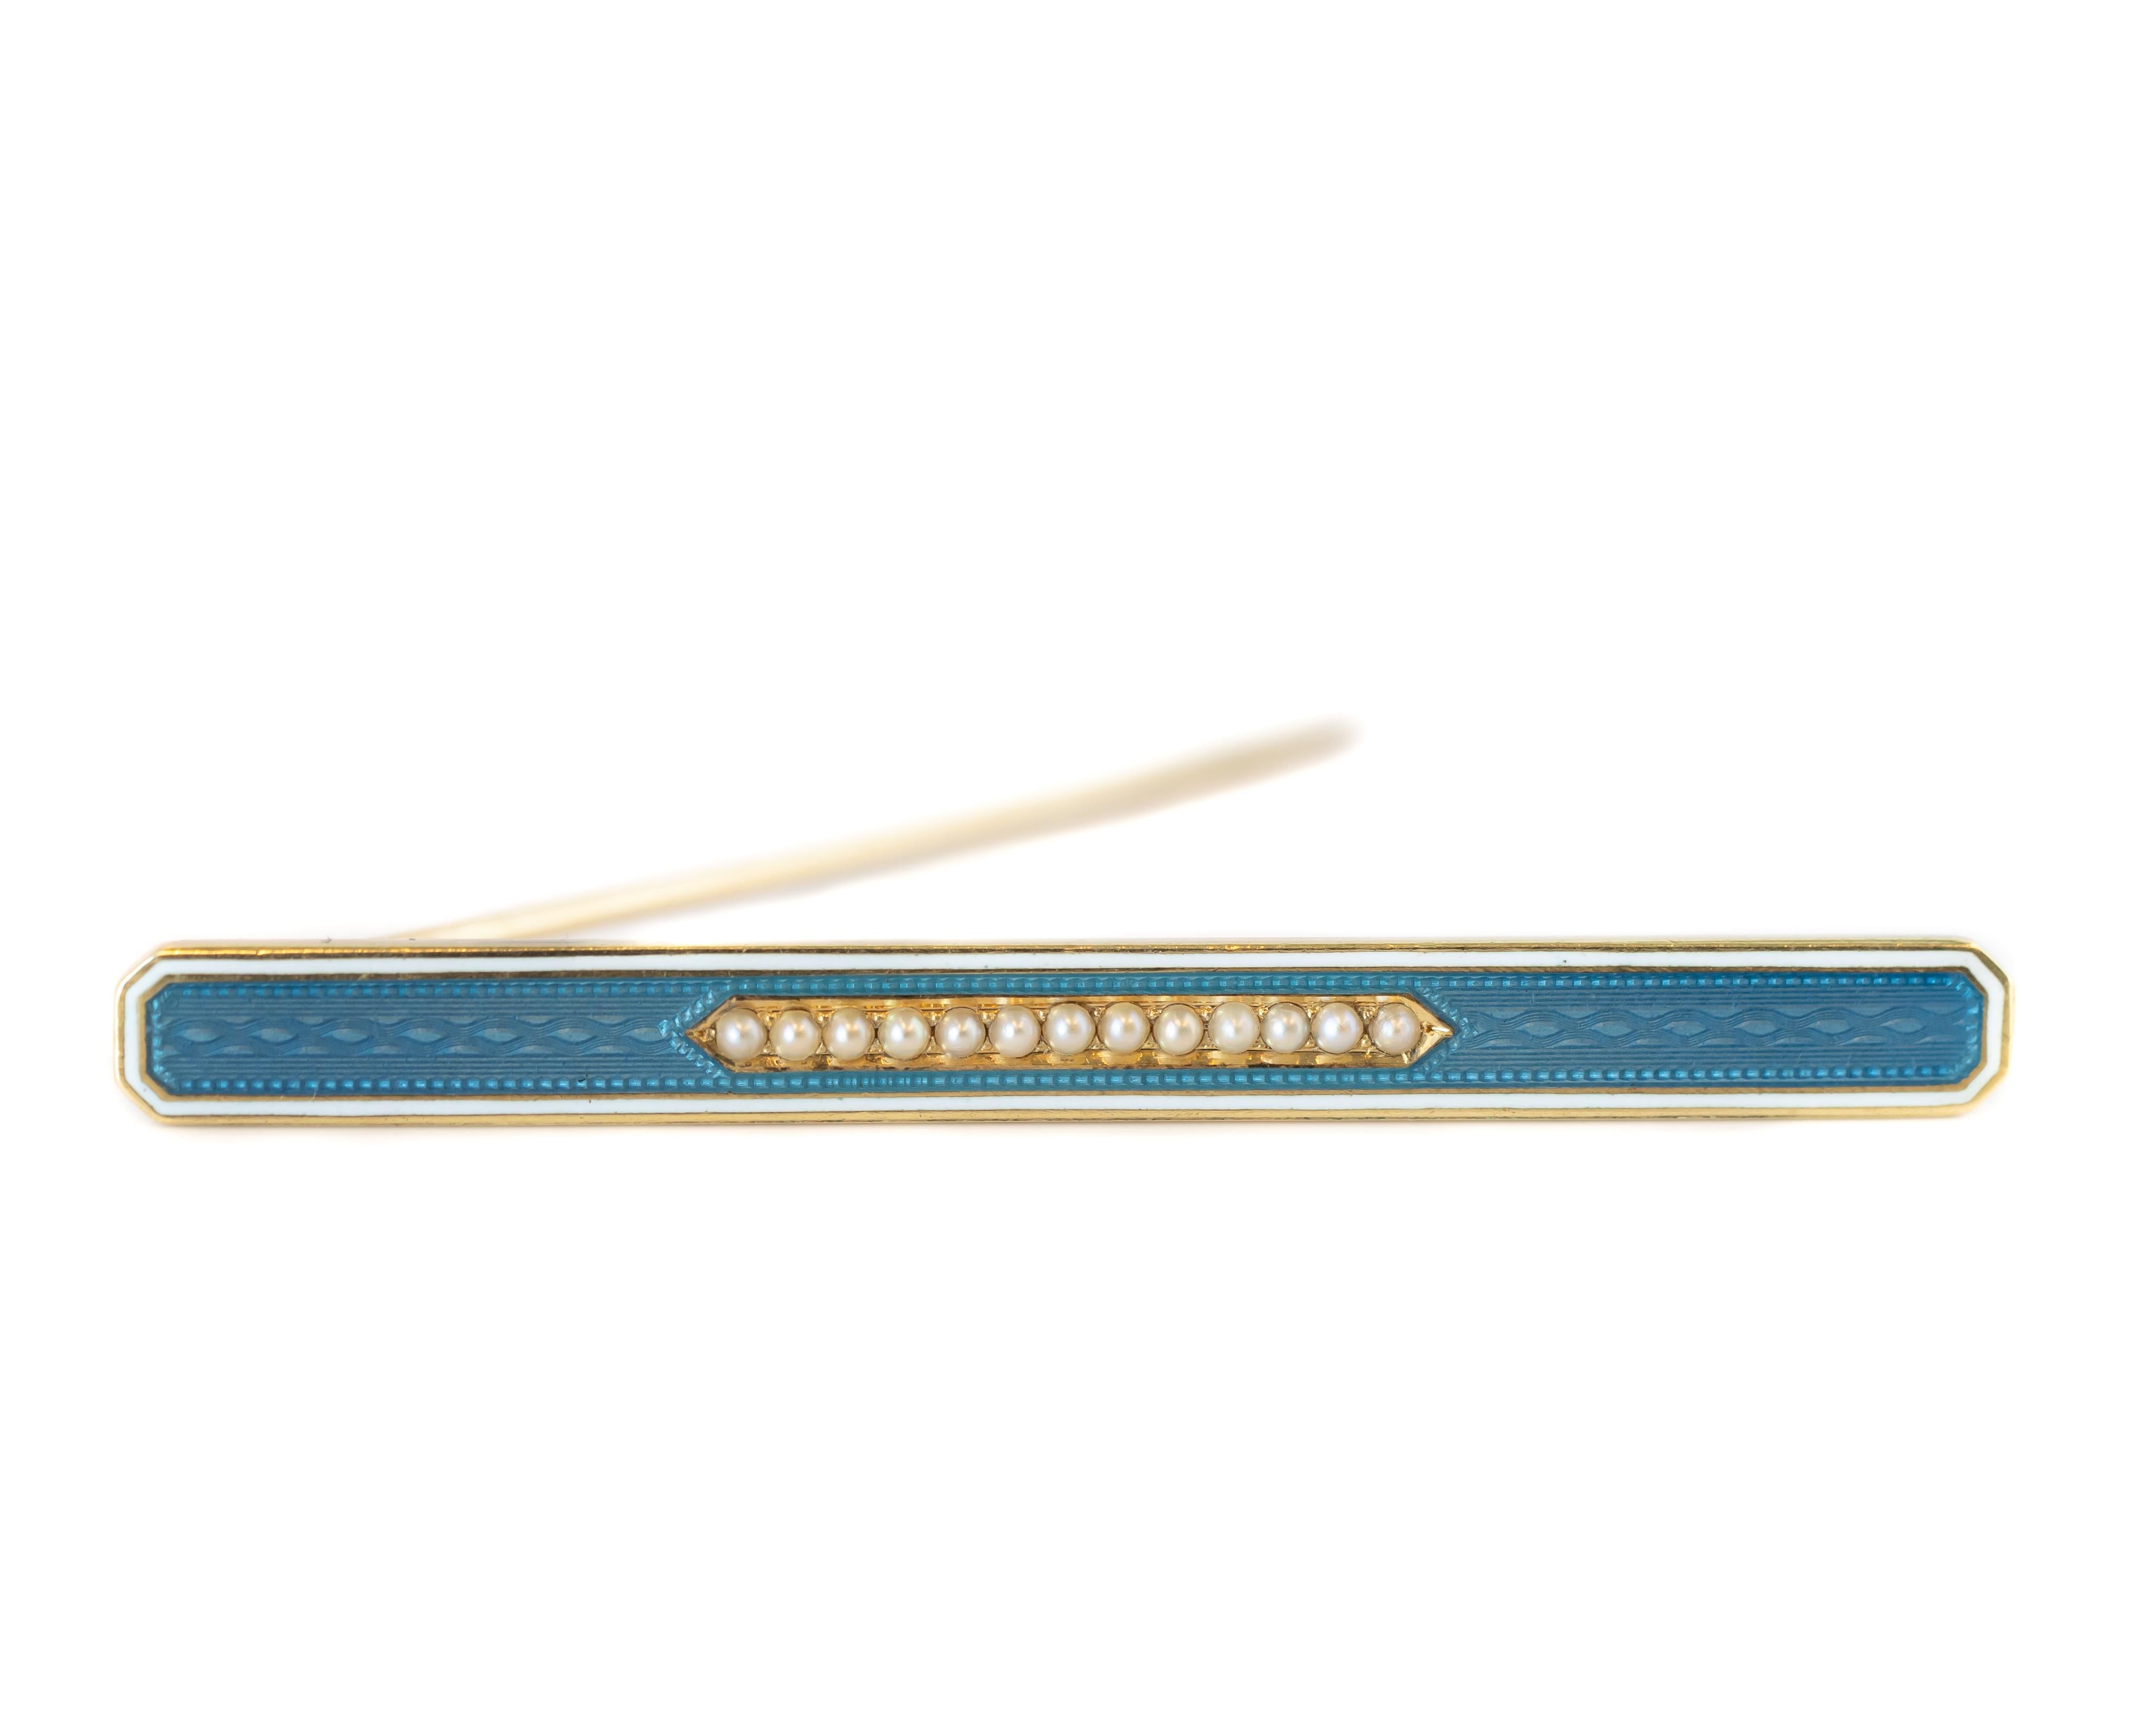 Antique Victorian Bar Pin from the 1880s crafted in beautiful 14 karat yellow gold, glass inlay and seed pearls

Features:
14 karat Yellow Gold, 13 Seed Pearls 
Azure Blue Glass Inlay and White Glass Inlay
Fine Geometric Pattern 
Safety C Clasp